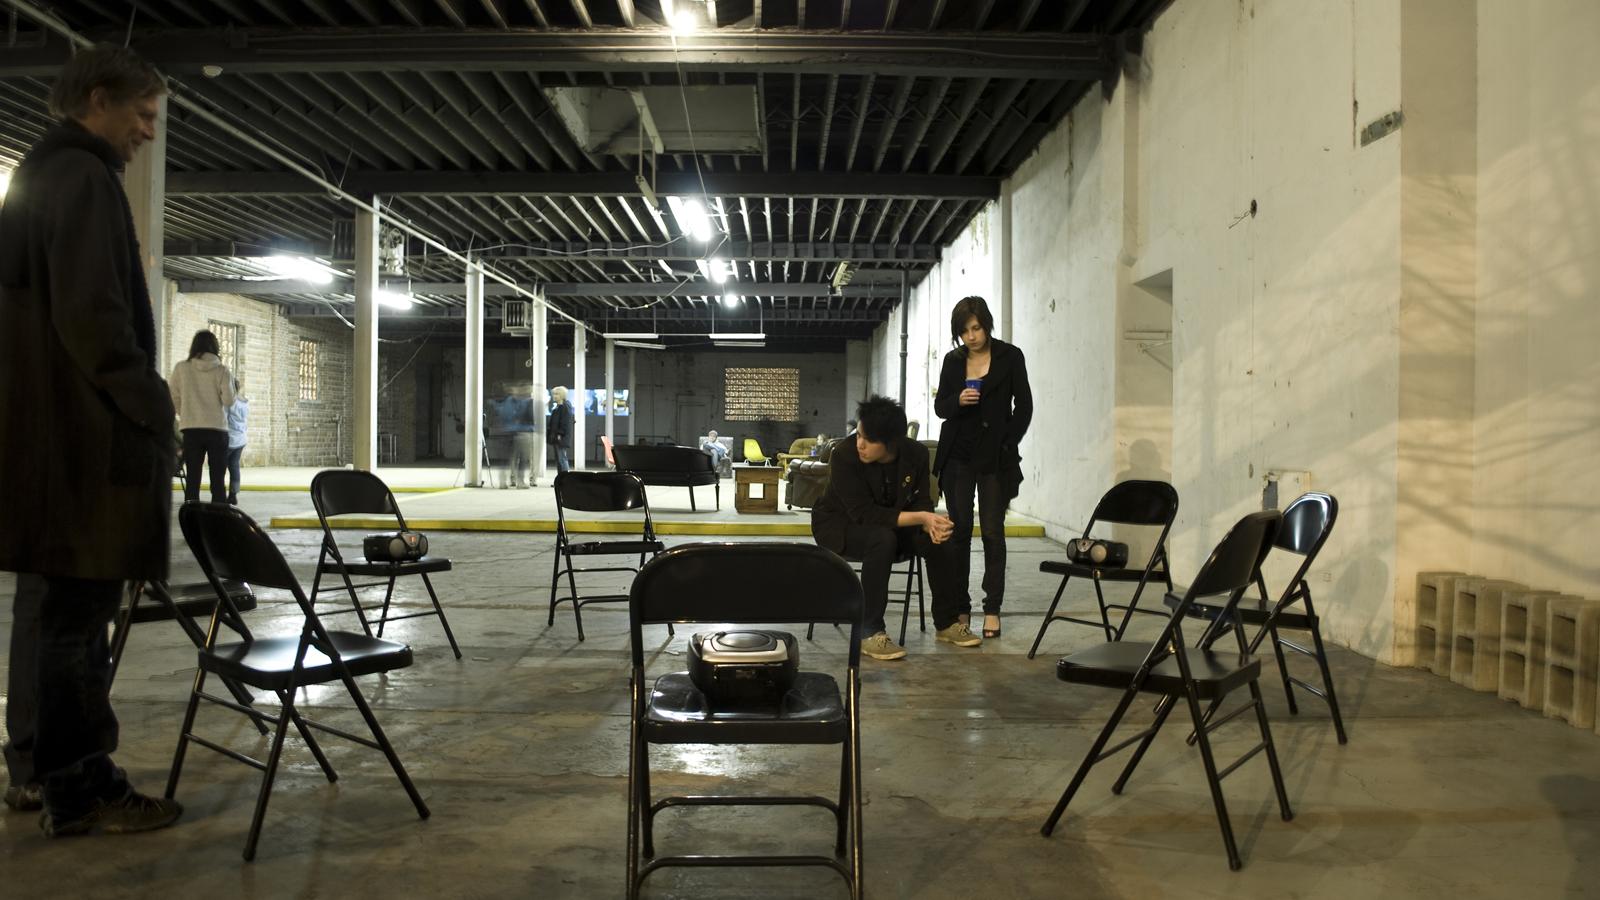 Brian Keith Sharrock, Untitled (come listen to yourselves), CD players, sound, metal chairs, video projection, 2009 – 2010